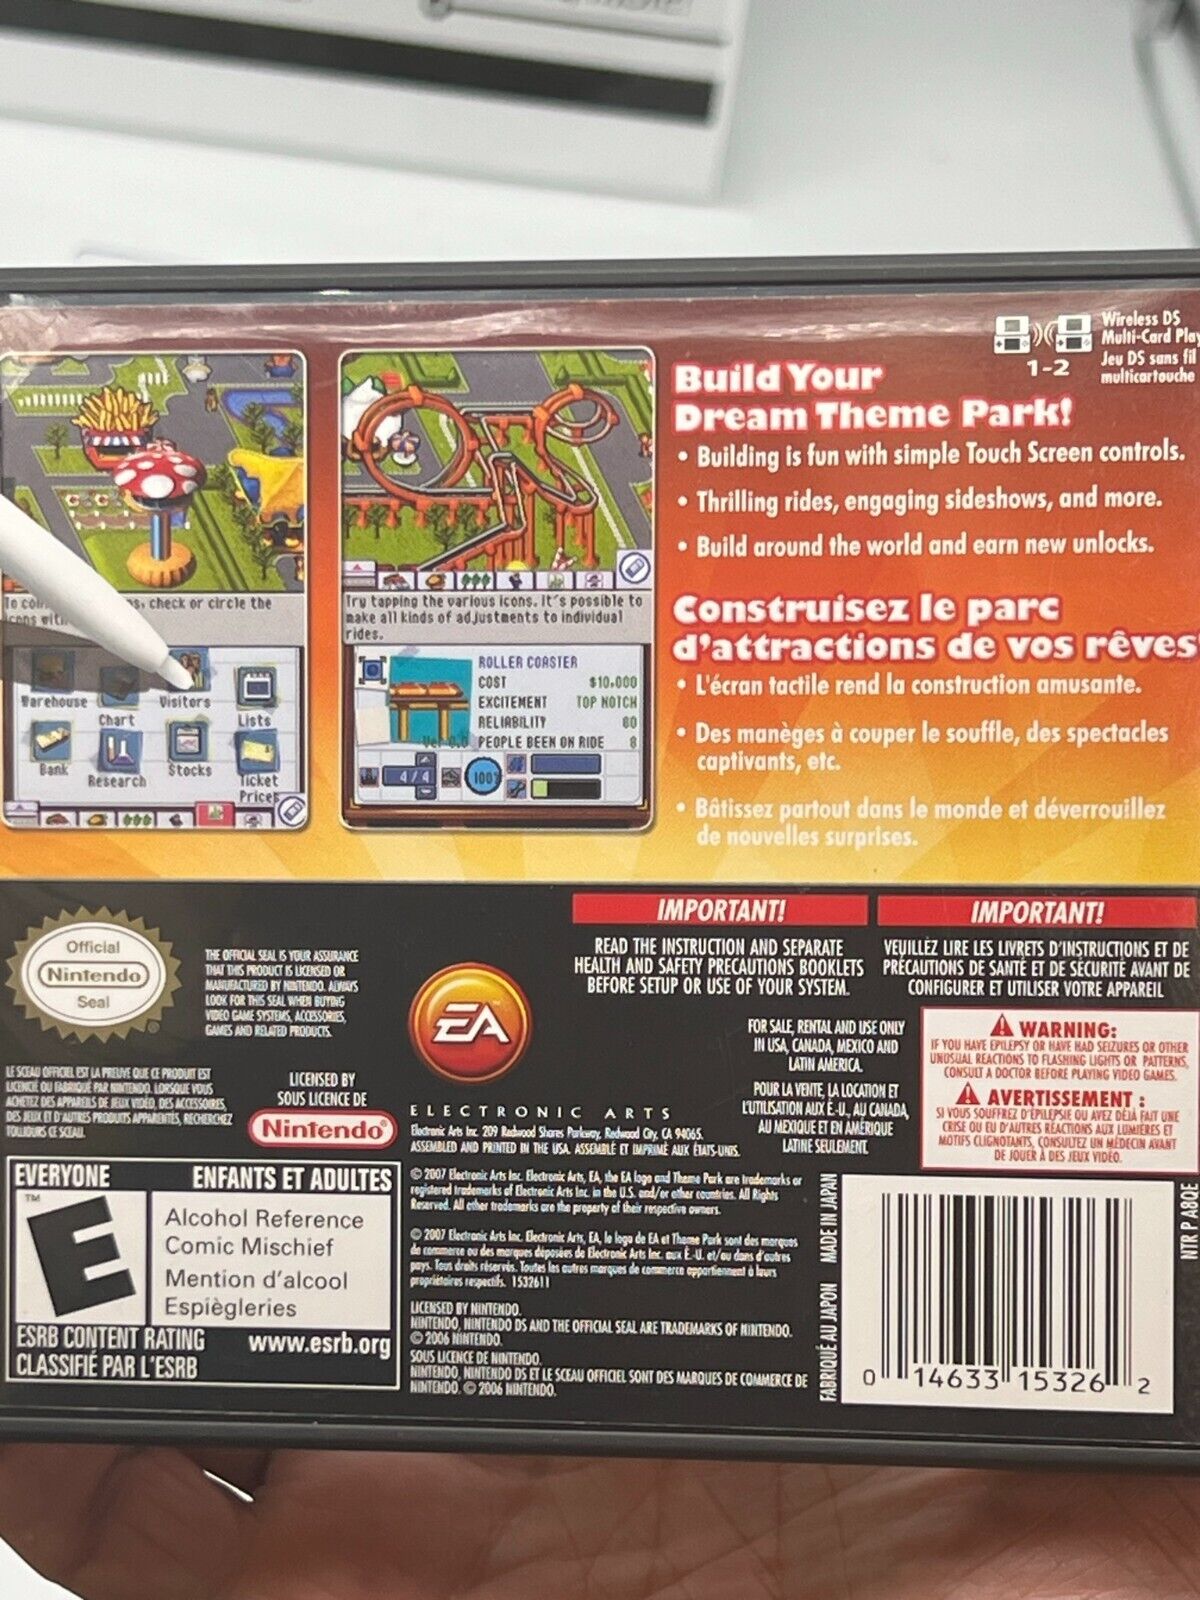 Theme Park (Nintendo DS, 2007) - Tested